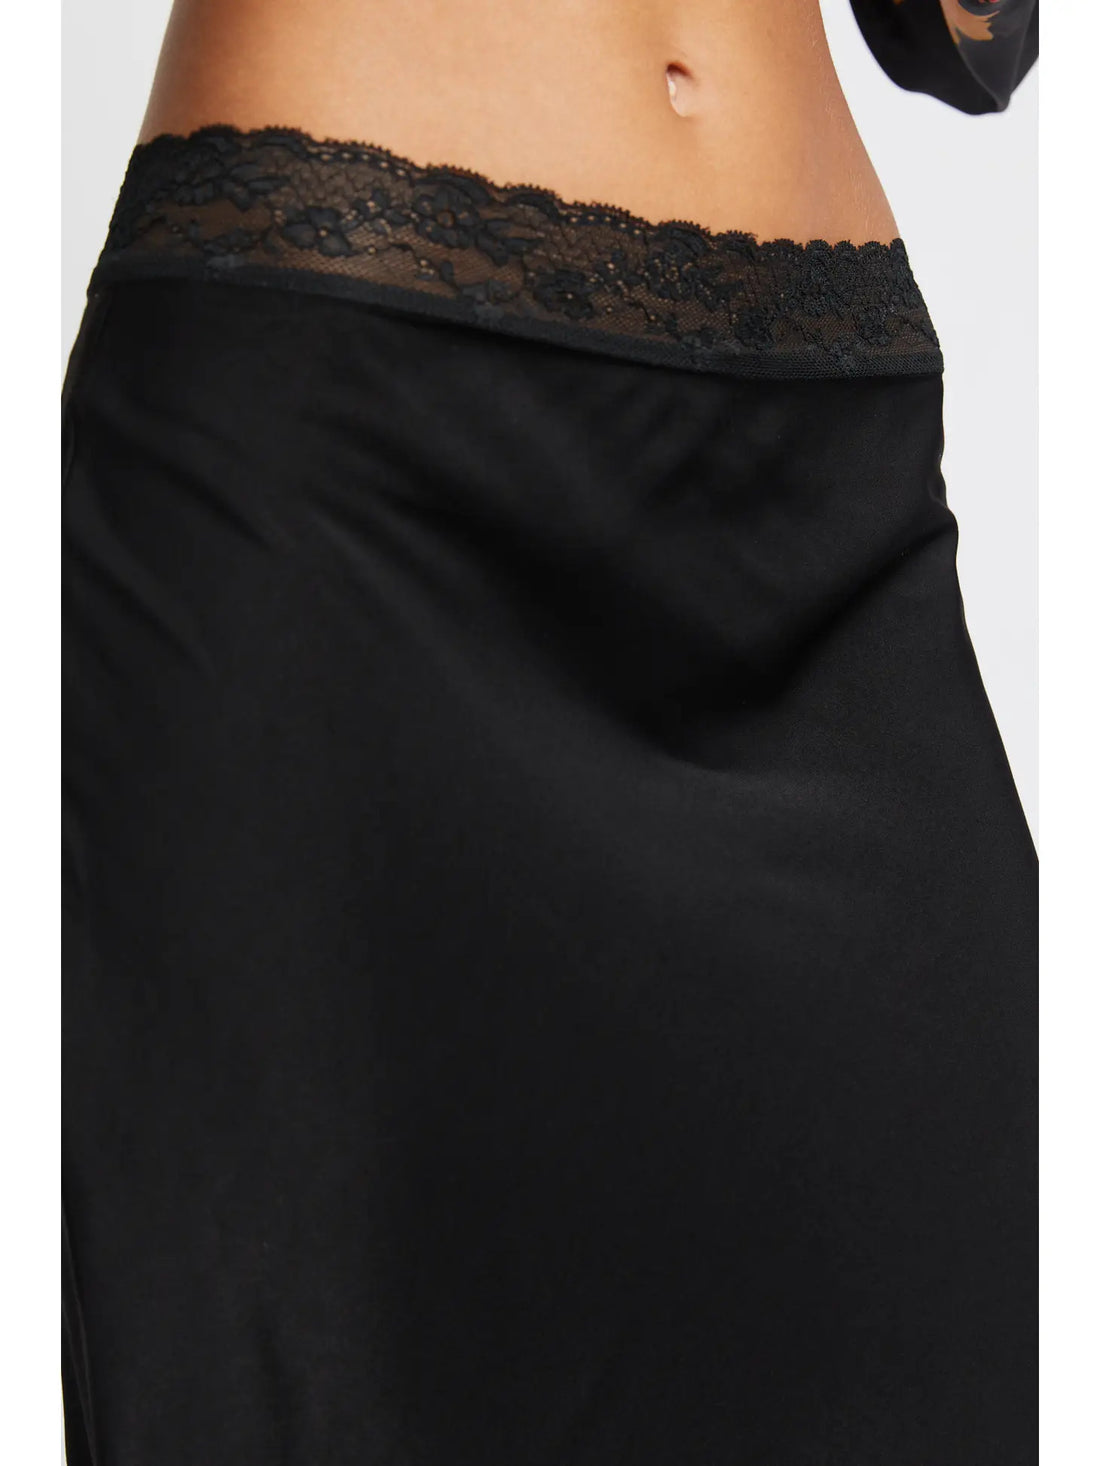 Satin Midi Skirt with Lace Detail